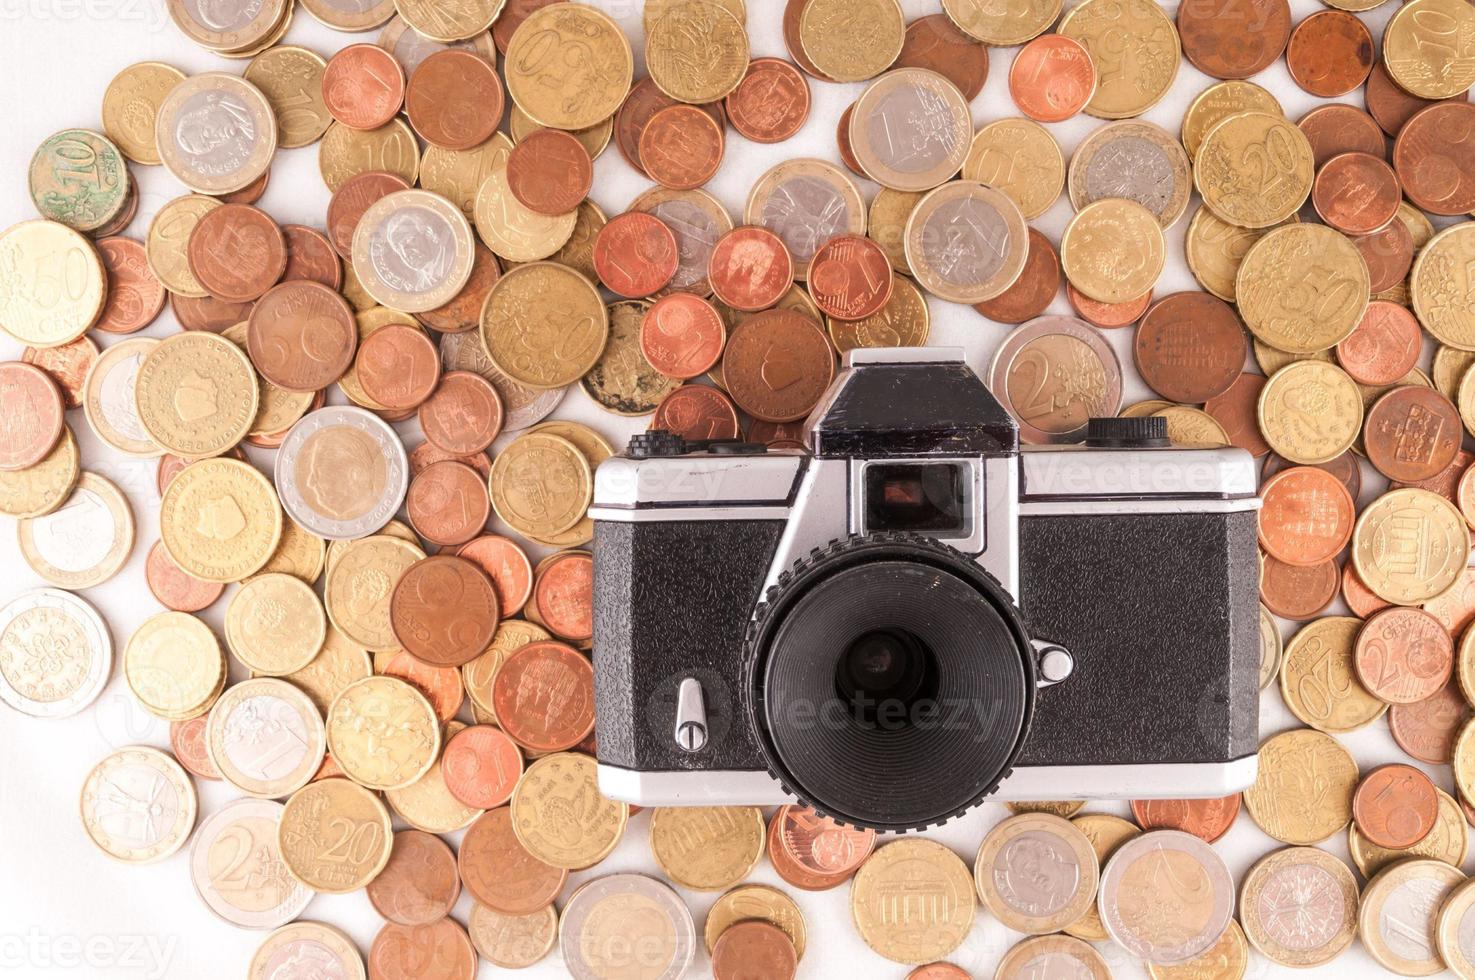 Coins and an old camera photo